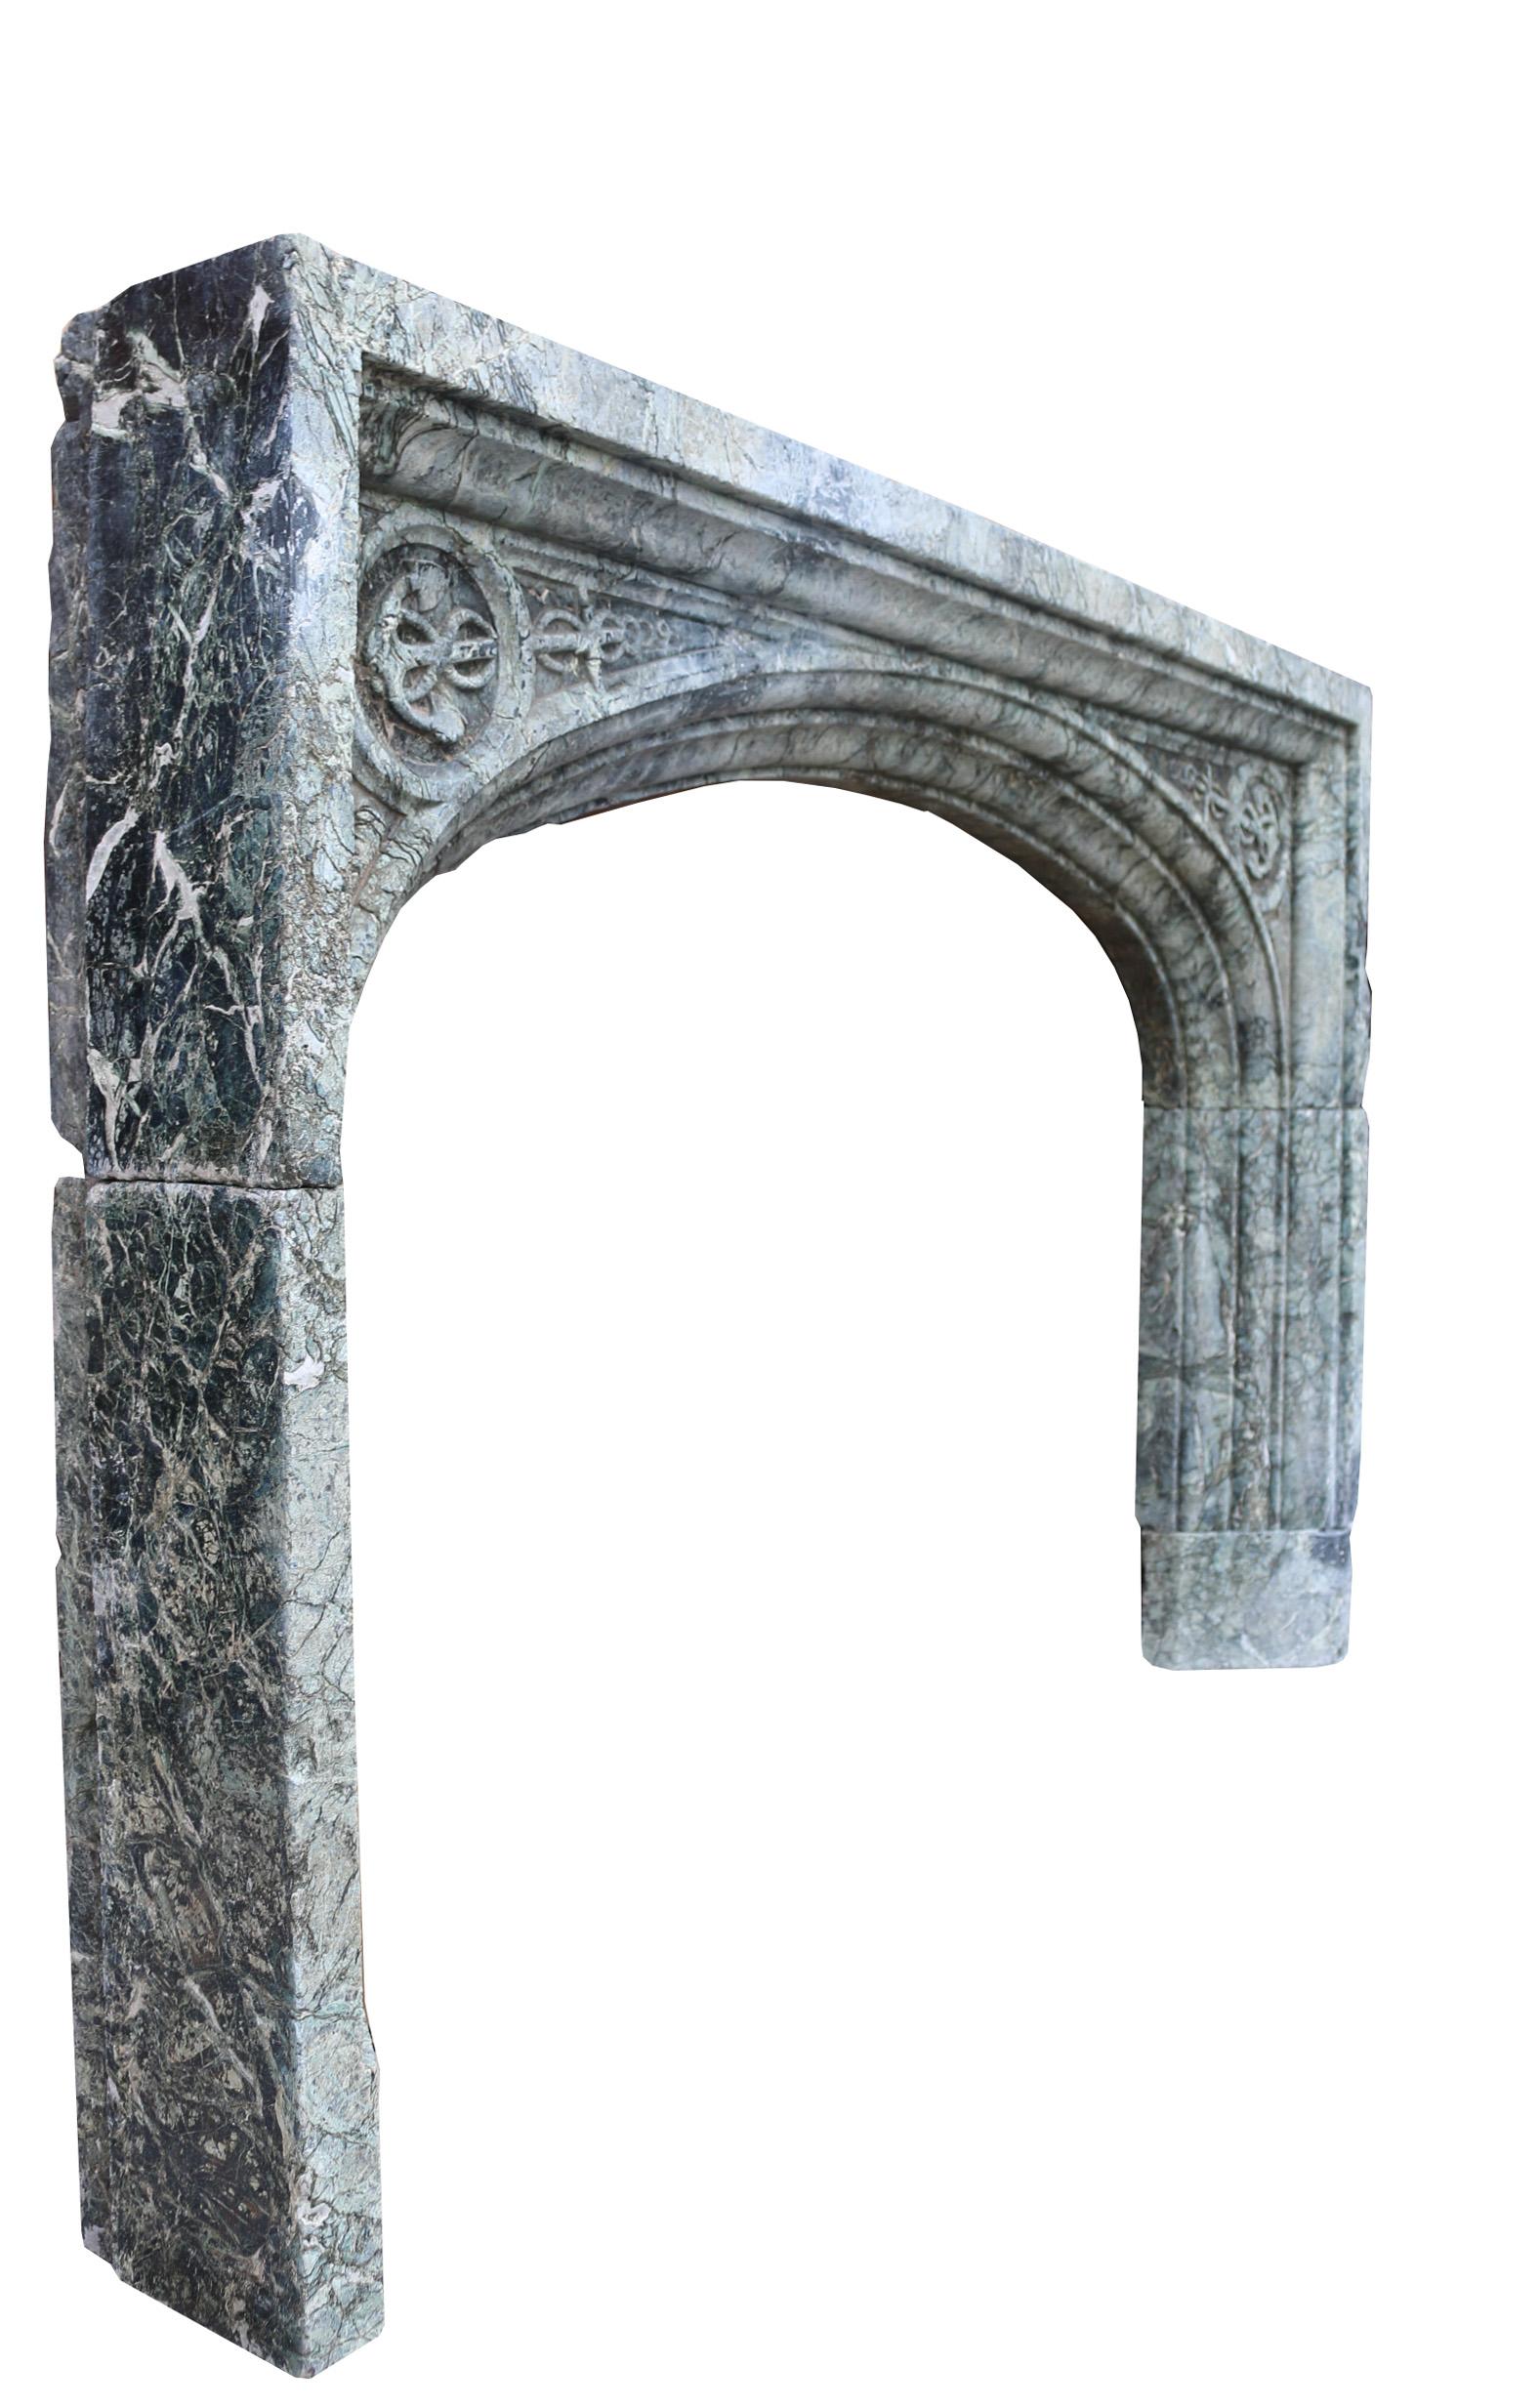 An interesting 19th century arched Maurin Green marble fire surround with anchors carved within roundels each side of the arch.

Measures: depth 20 cm (total) 15 cm (visible once installed)

Opening height 89 cm

Opening width 125.5 cm.